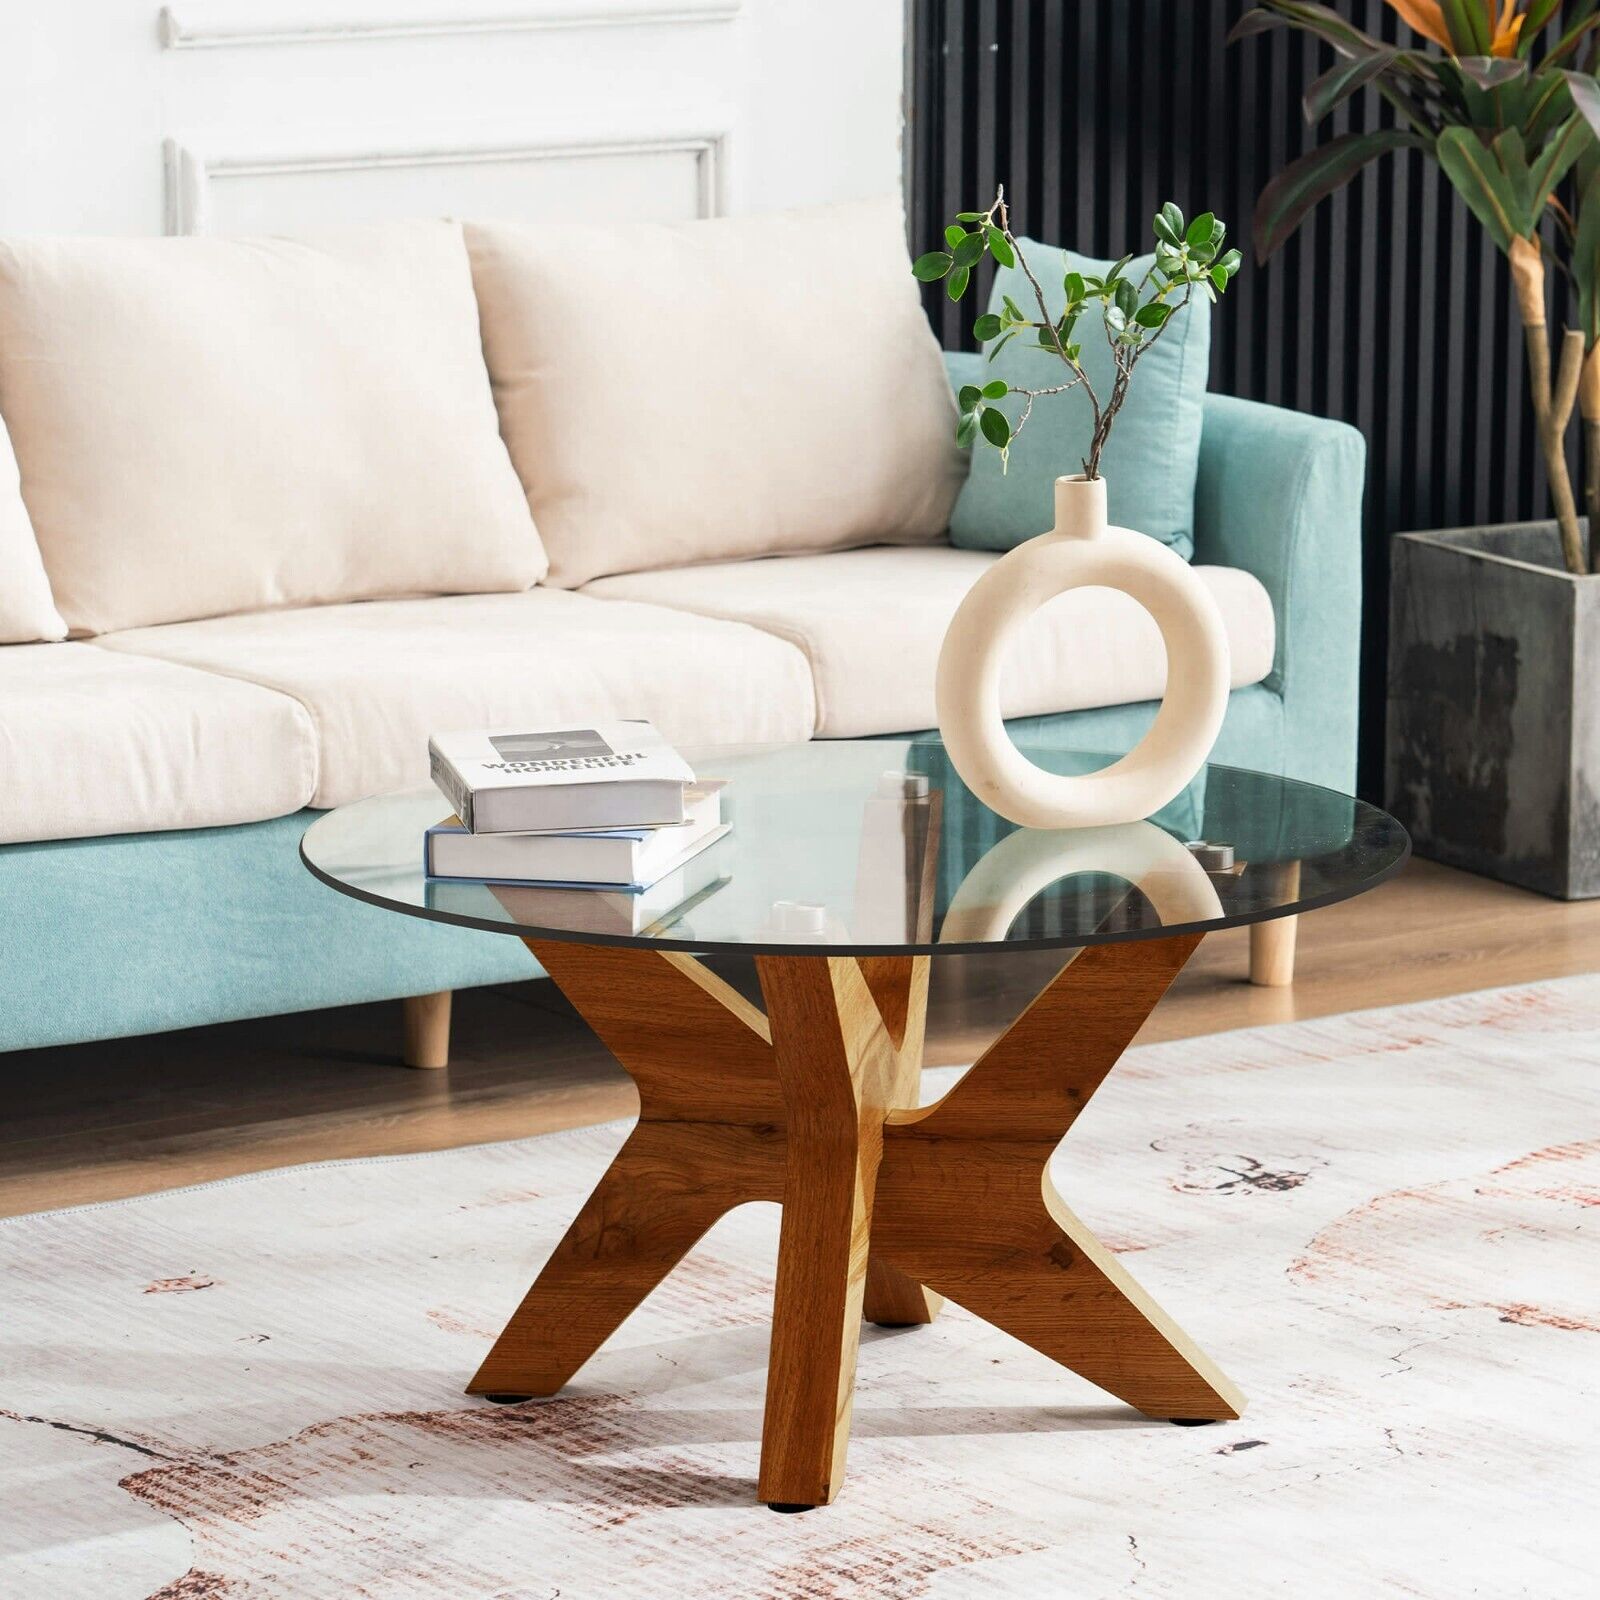 Ivinta Modern Round Glass Coffee Table with Cross Wood Legs for Living Room